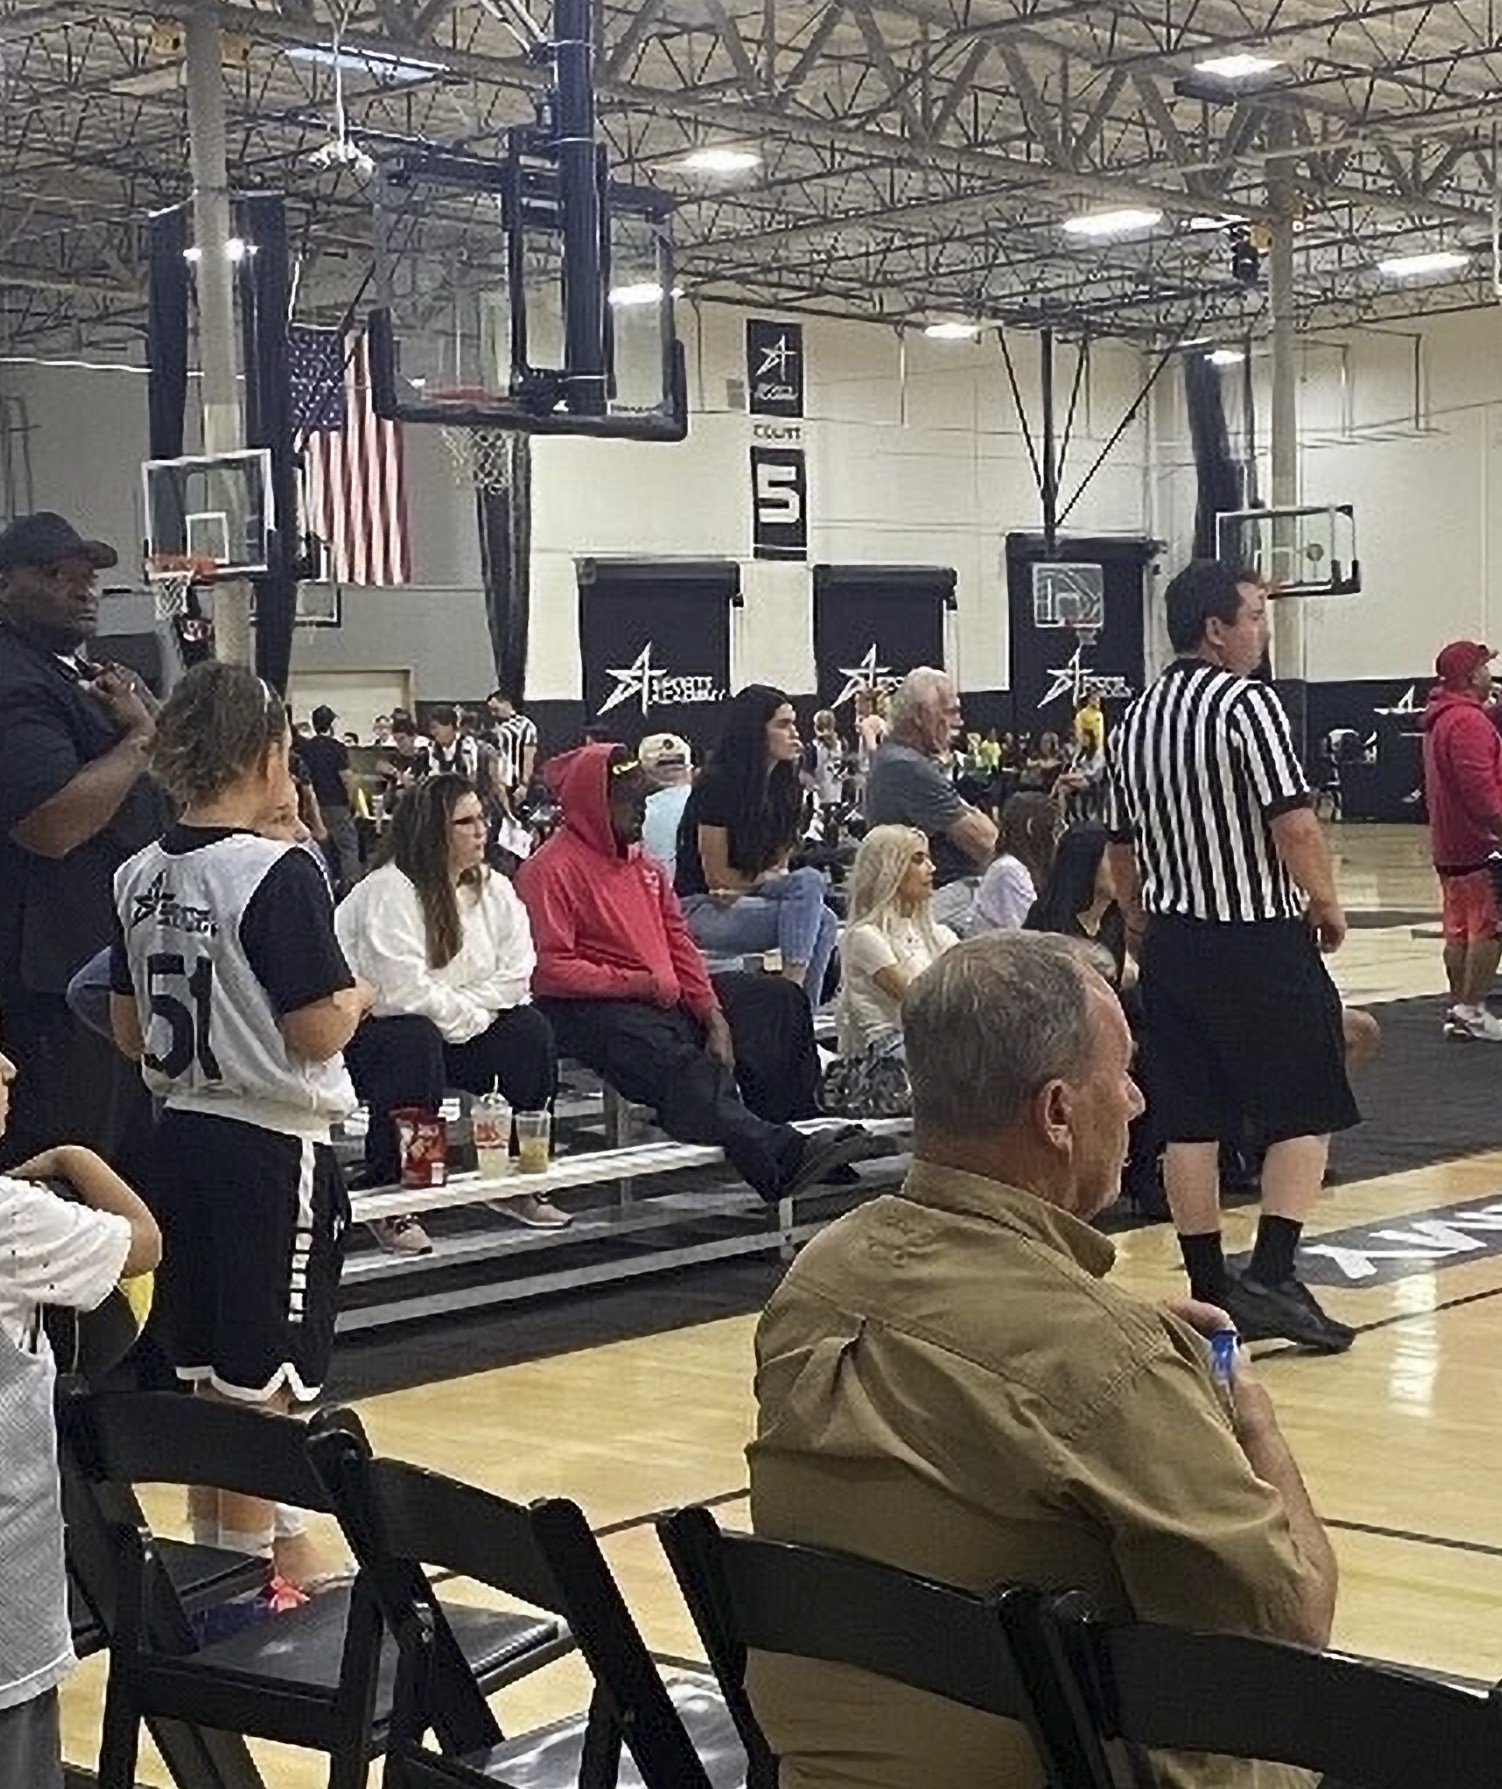 Kim Kardashian and Kanye West met at their daughter North's basketball game (Photo: The Grosby Group)